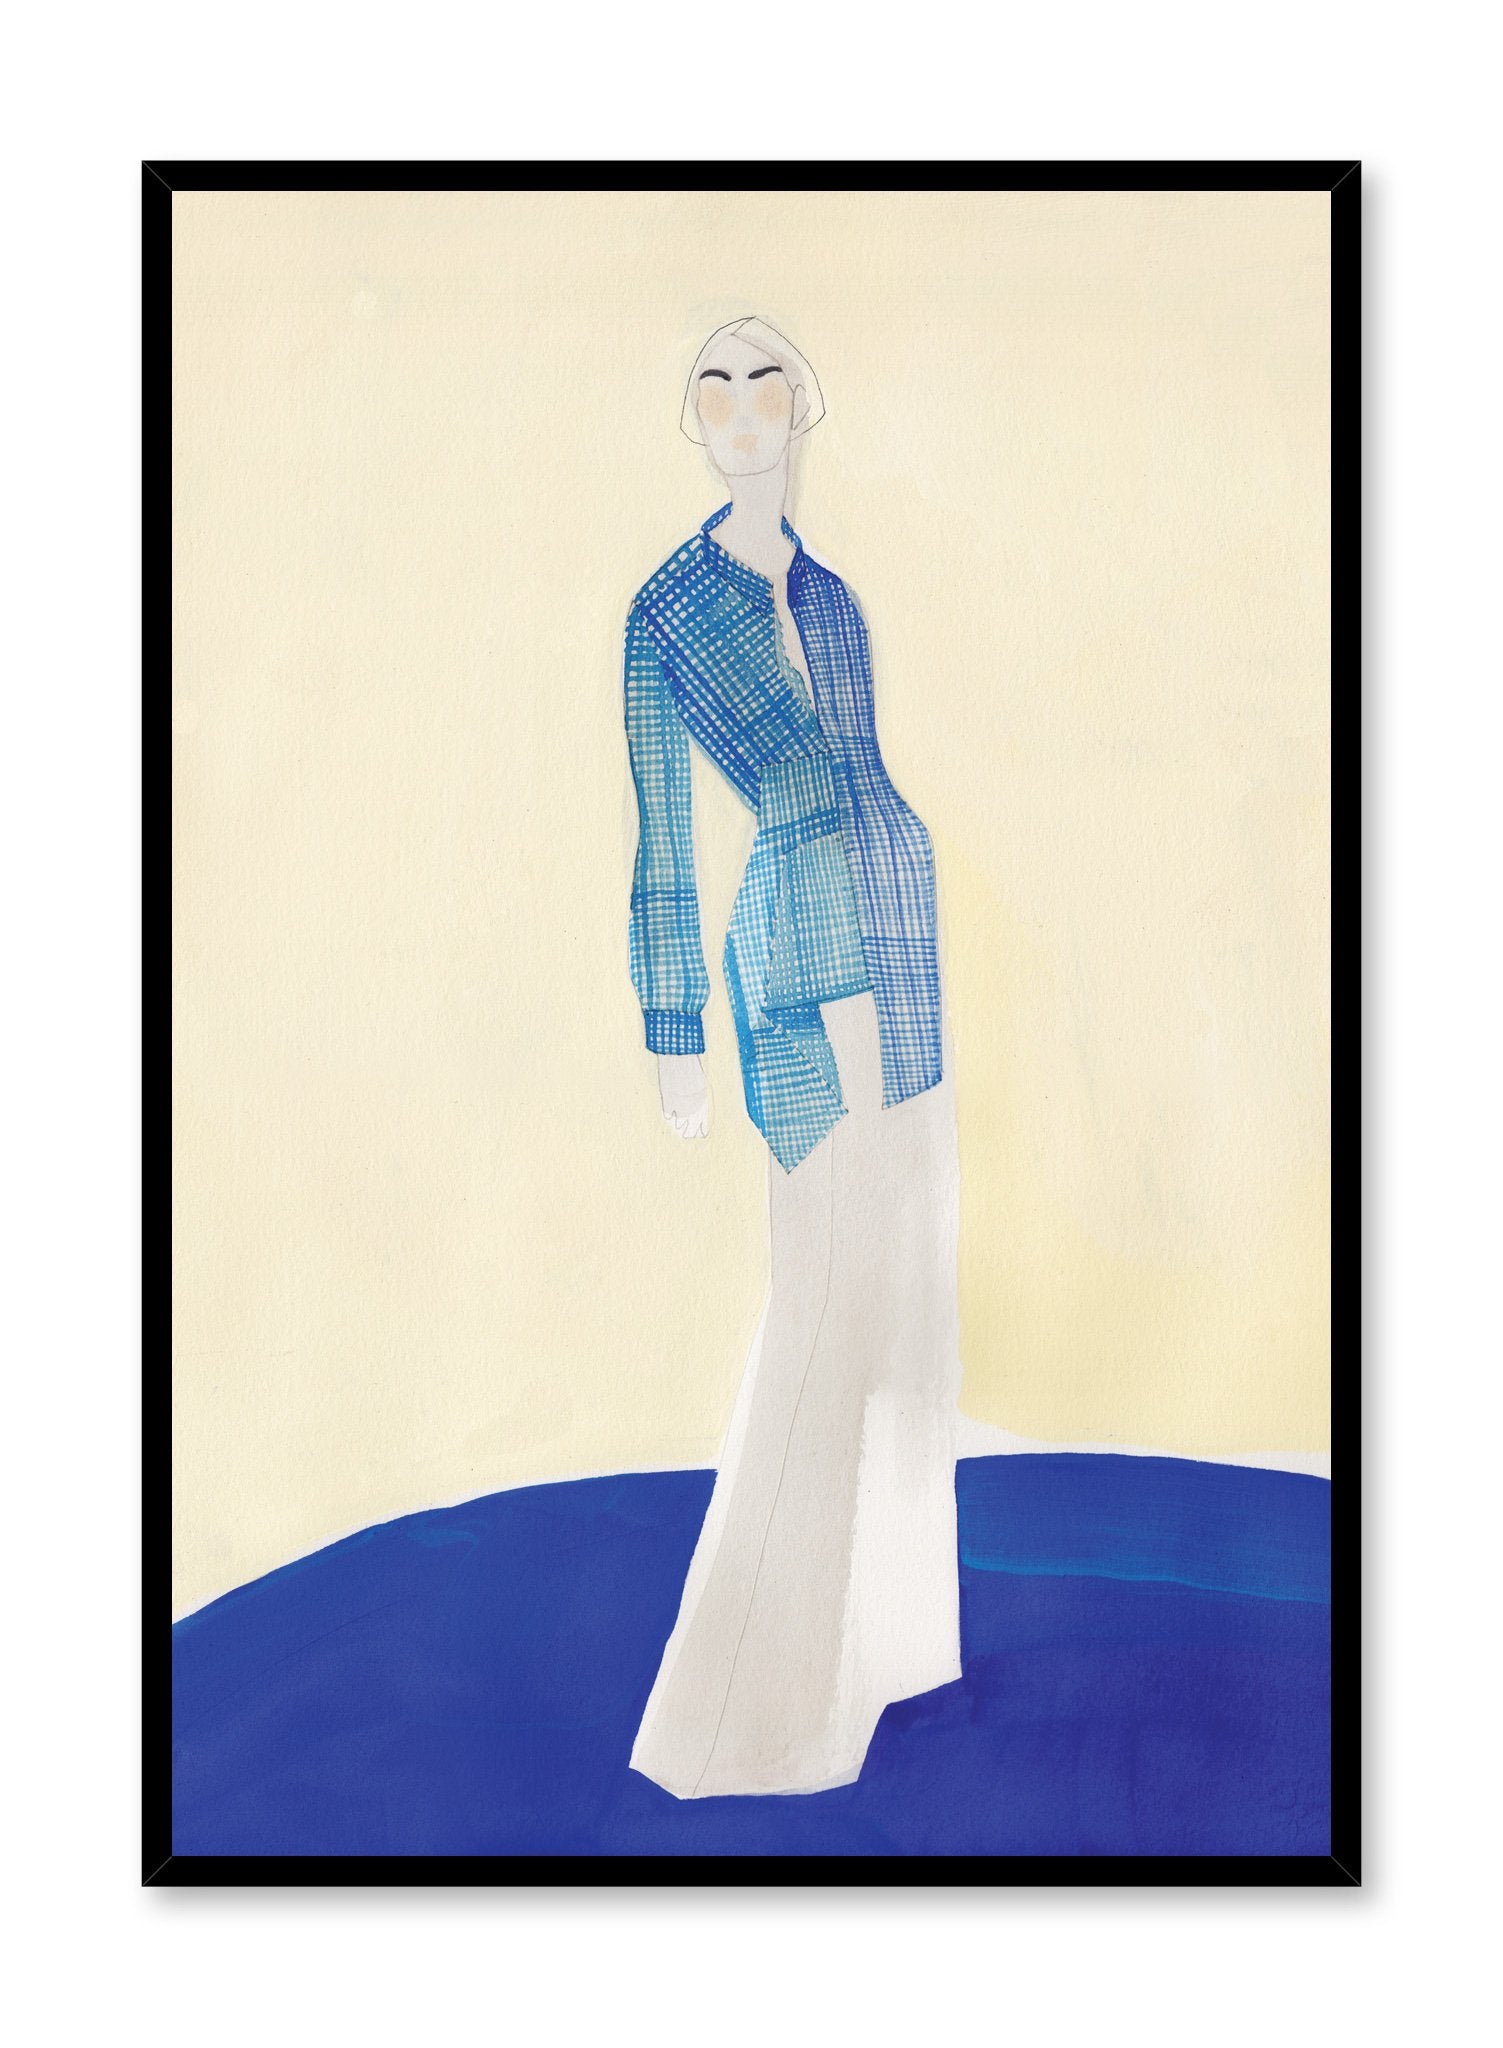 Fashion illustration poster by Opposite Wall of a minimalist female model wearing a blue button-down shirt and white bell-bottom pants.